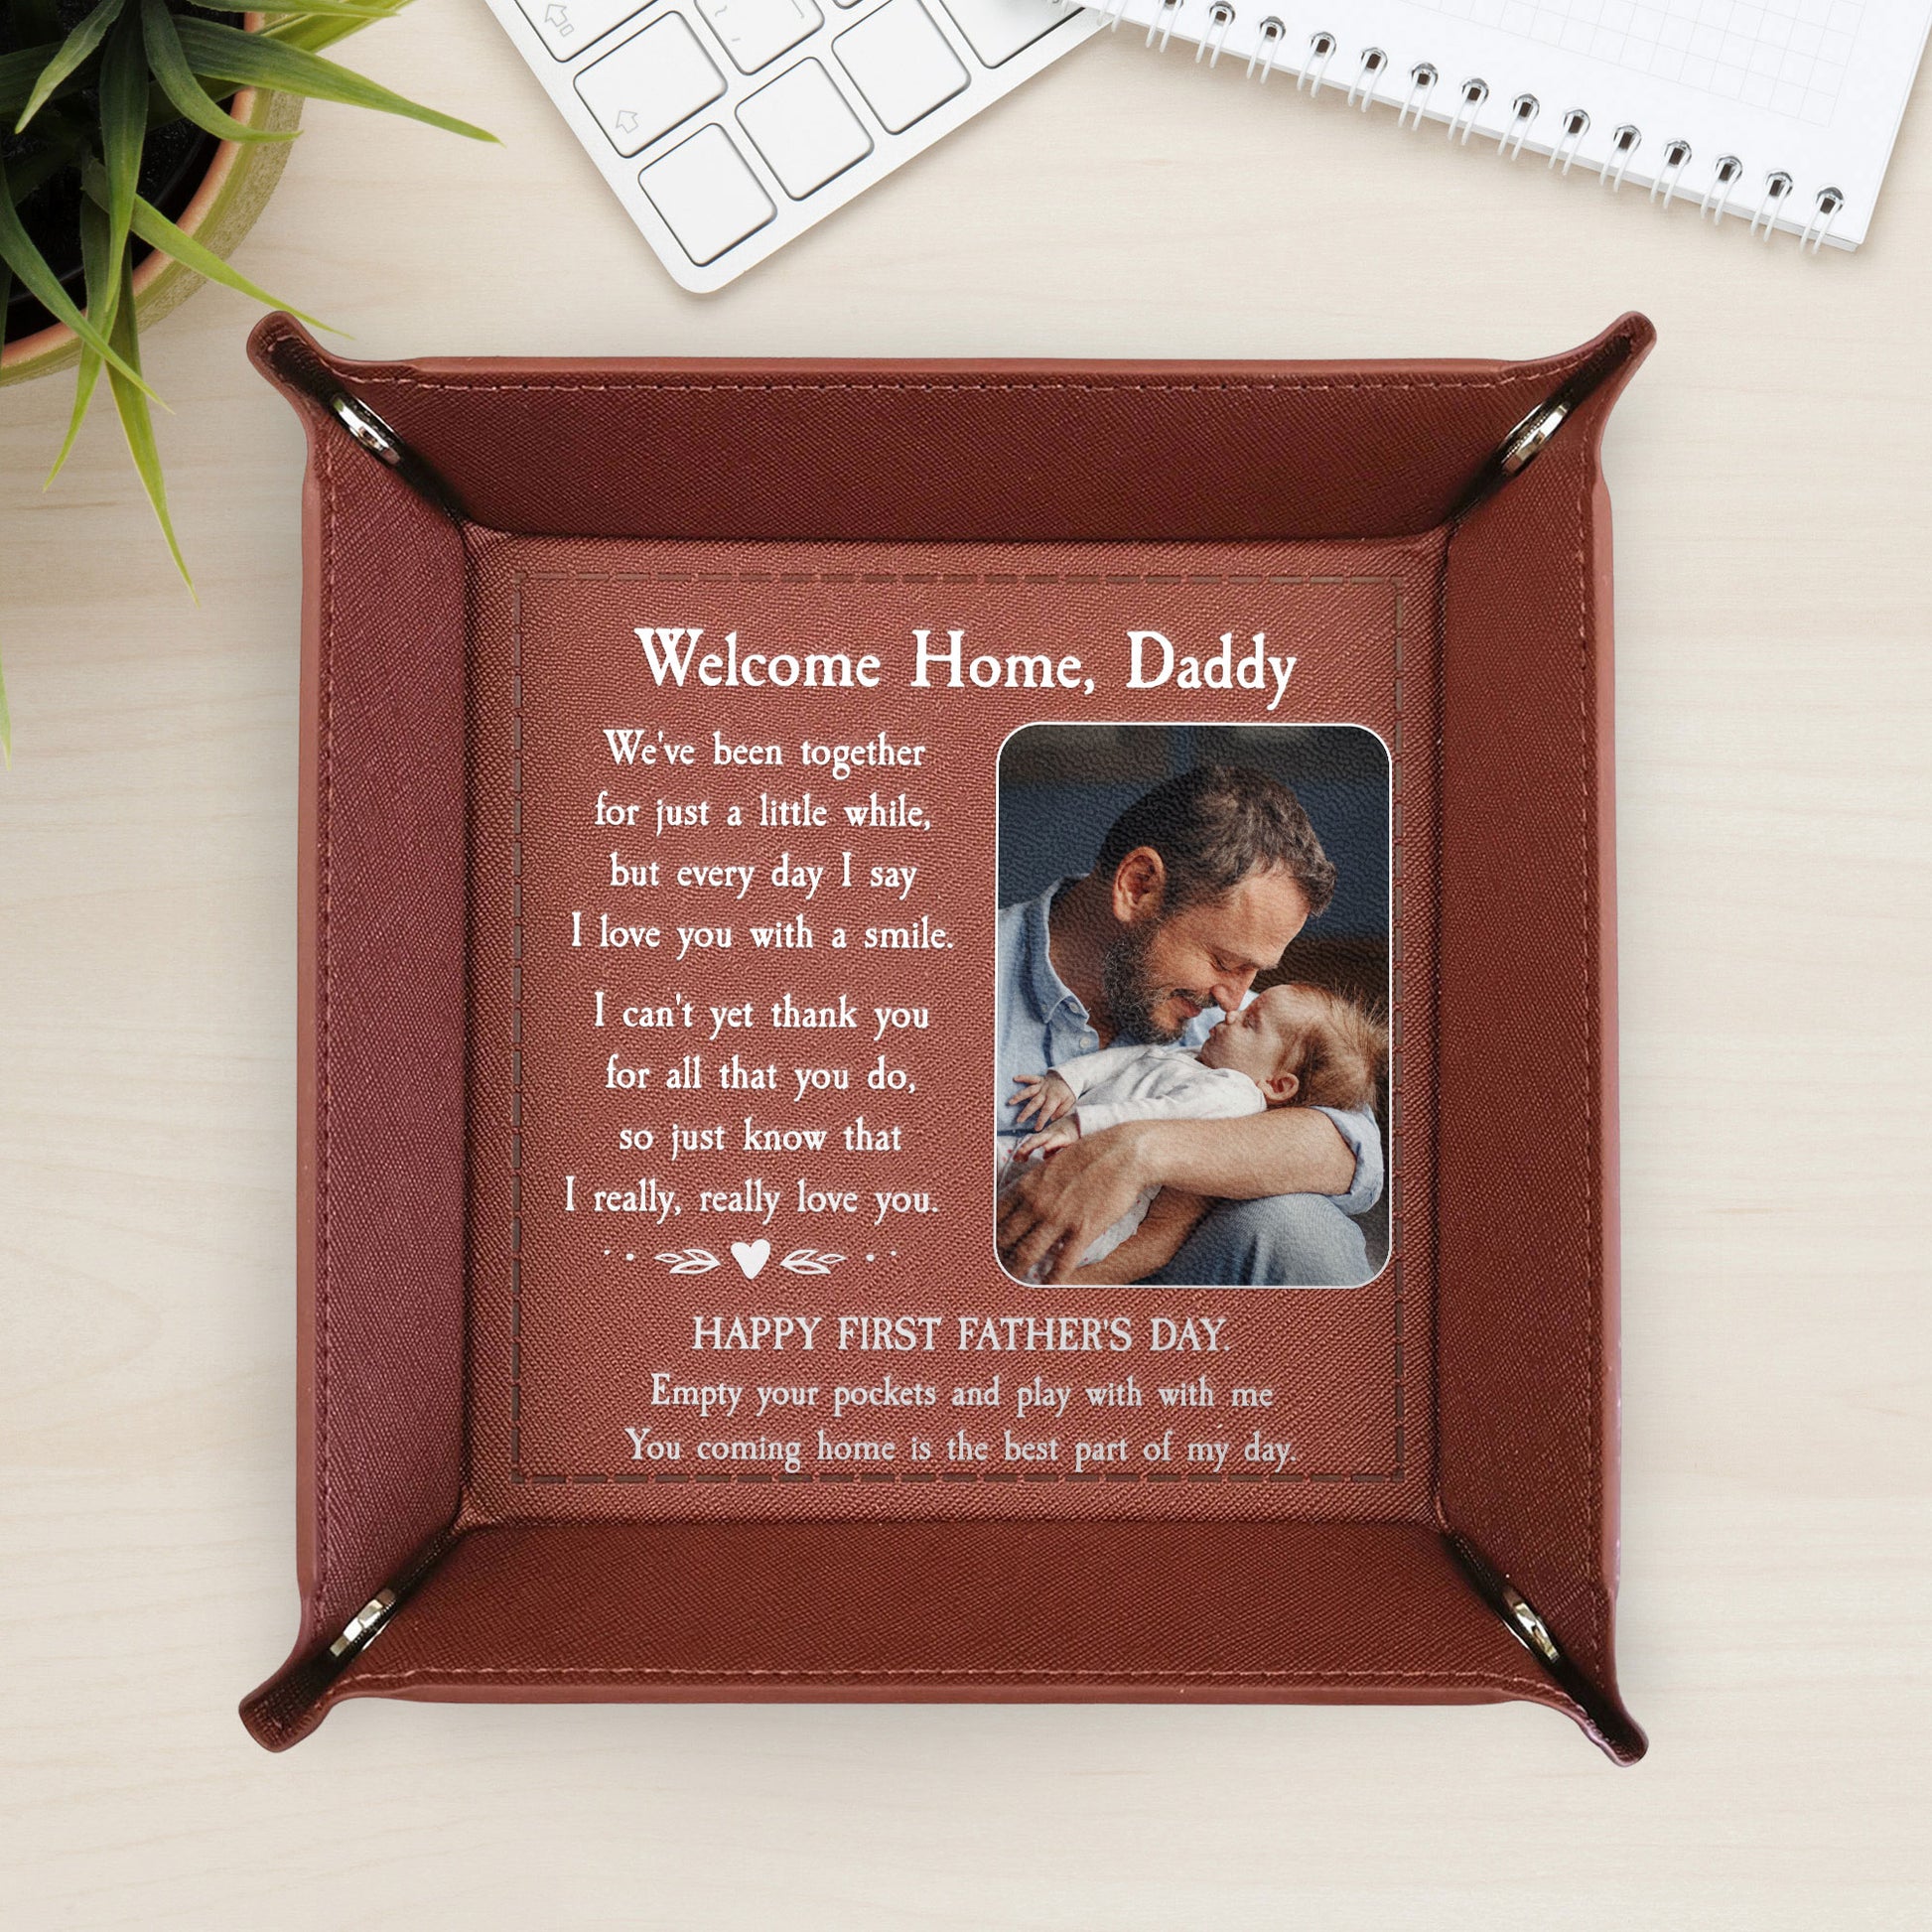 We've Been Together For Just A Little While New Dad - Personalized Leather Valet Tray